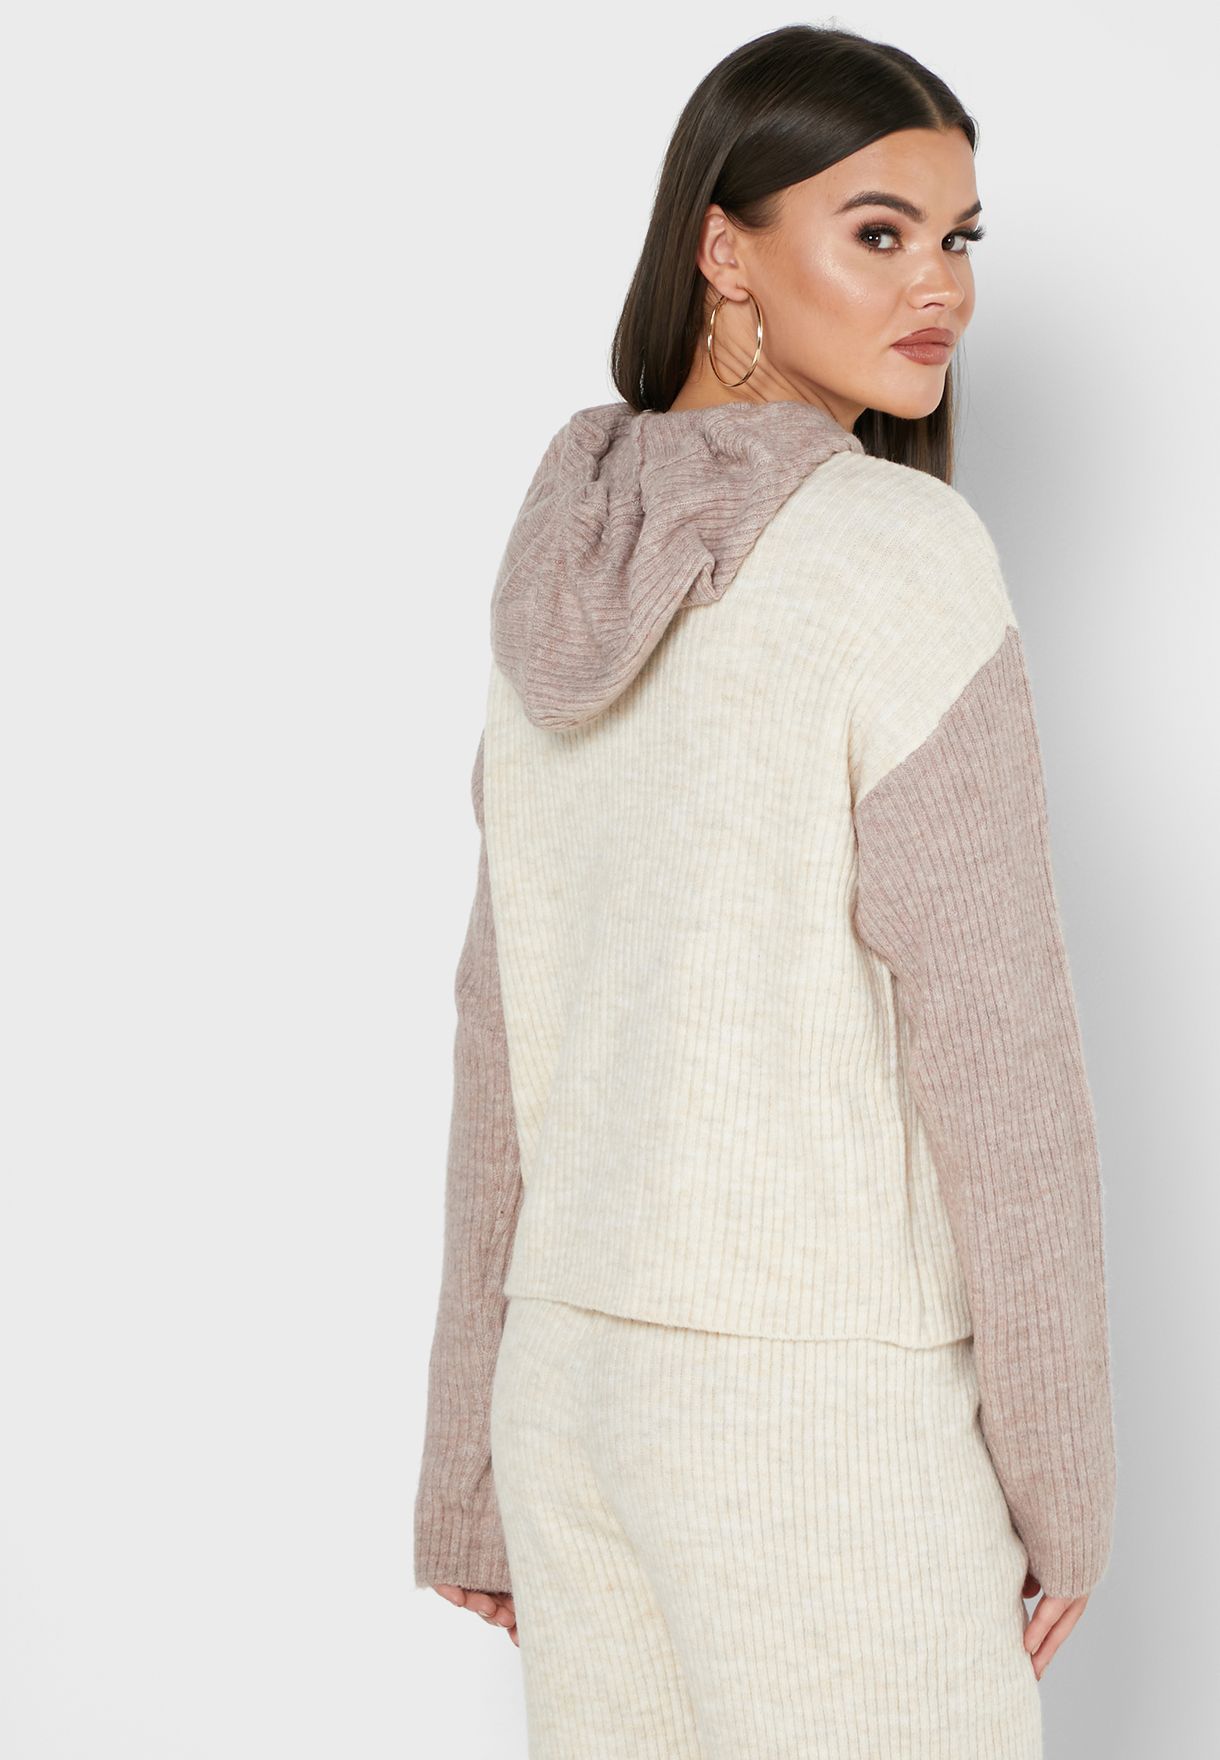 Buy Missguided beige Color block Sweater for Women in Dubai, Abu Dhabi